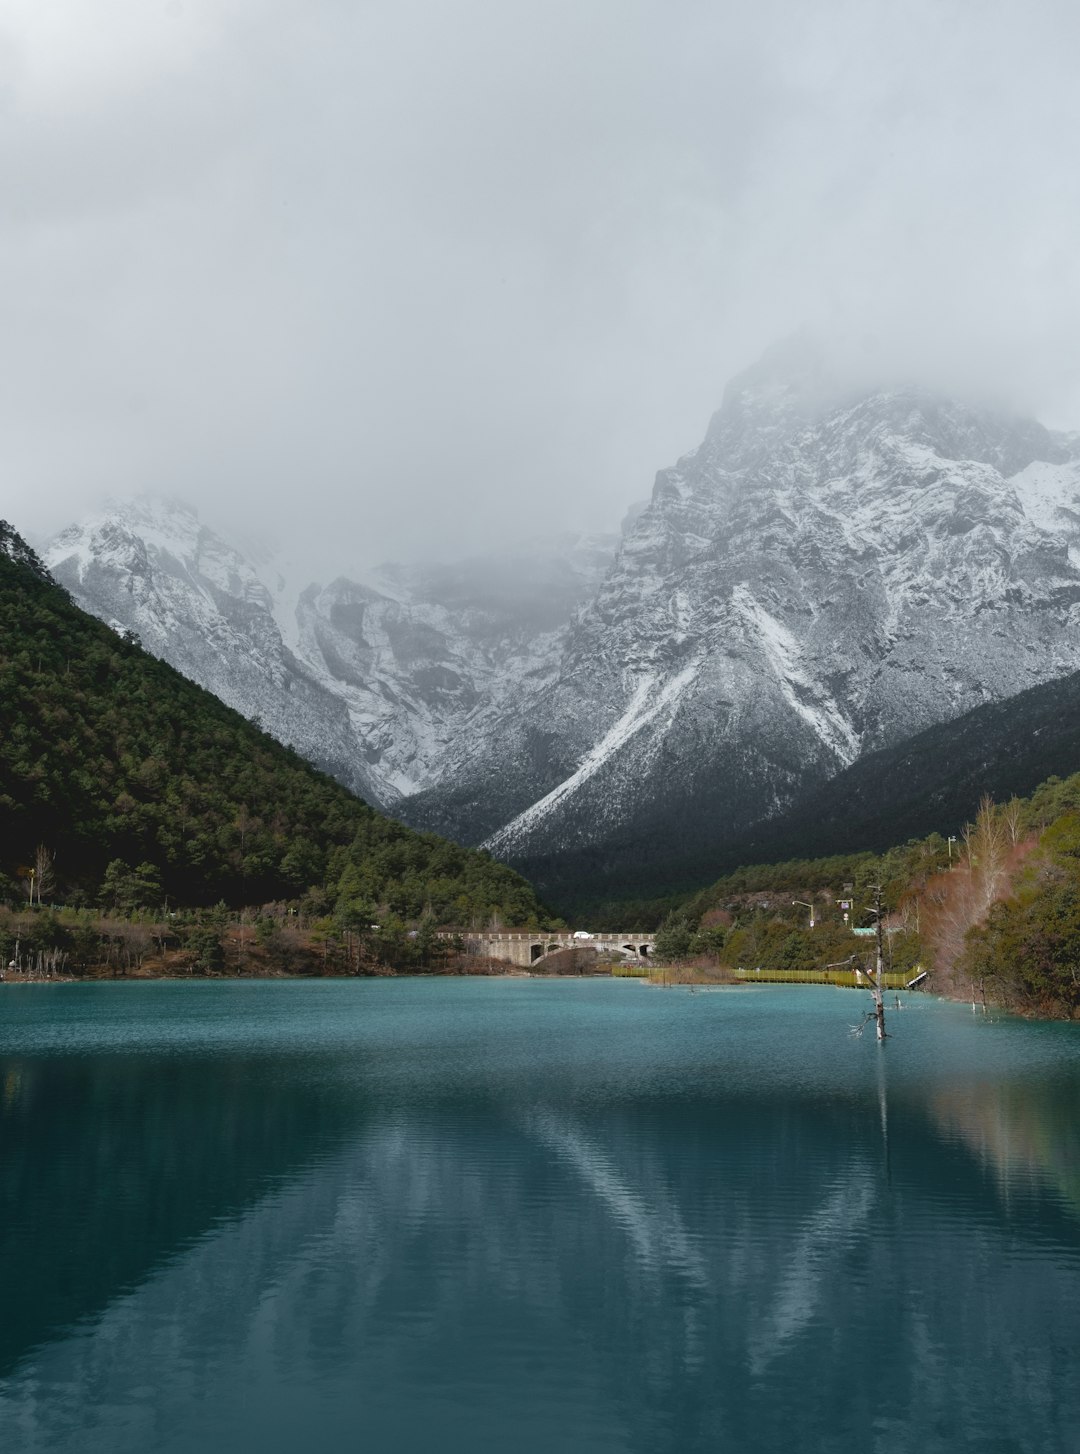 Travel Tips and Stories of Lijiang in China